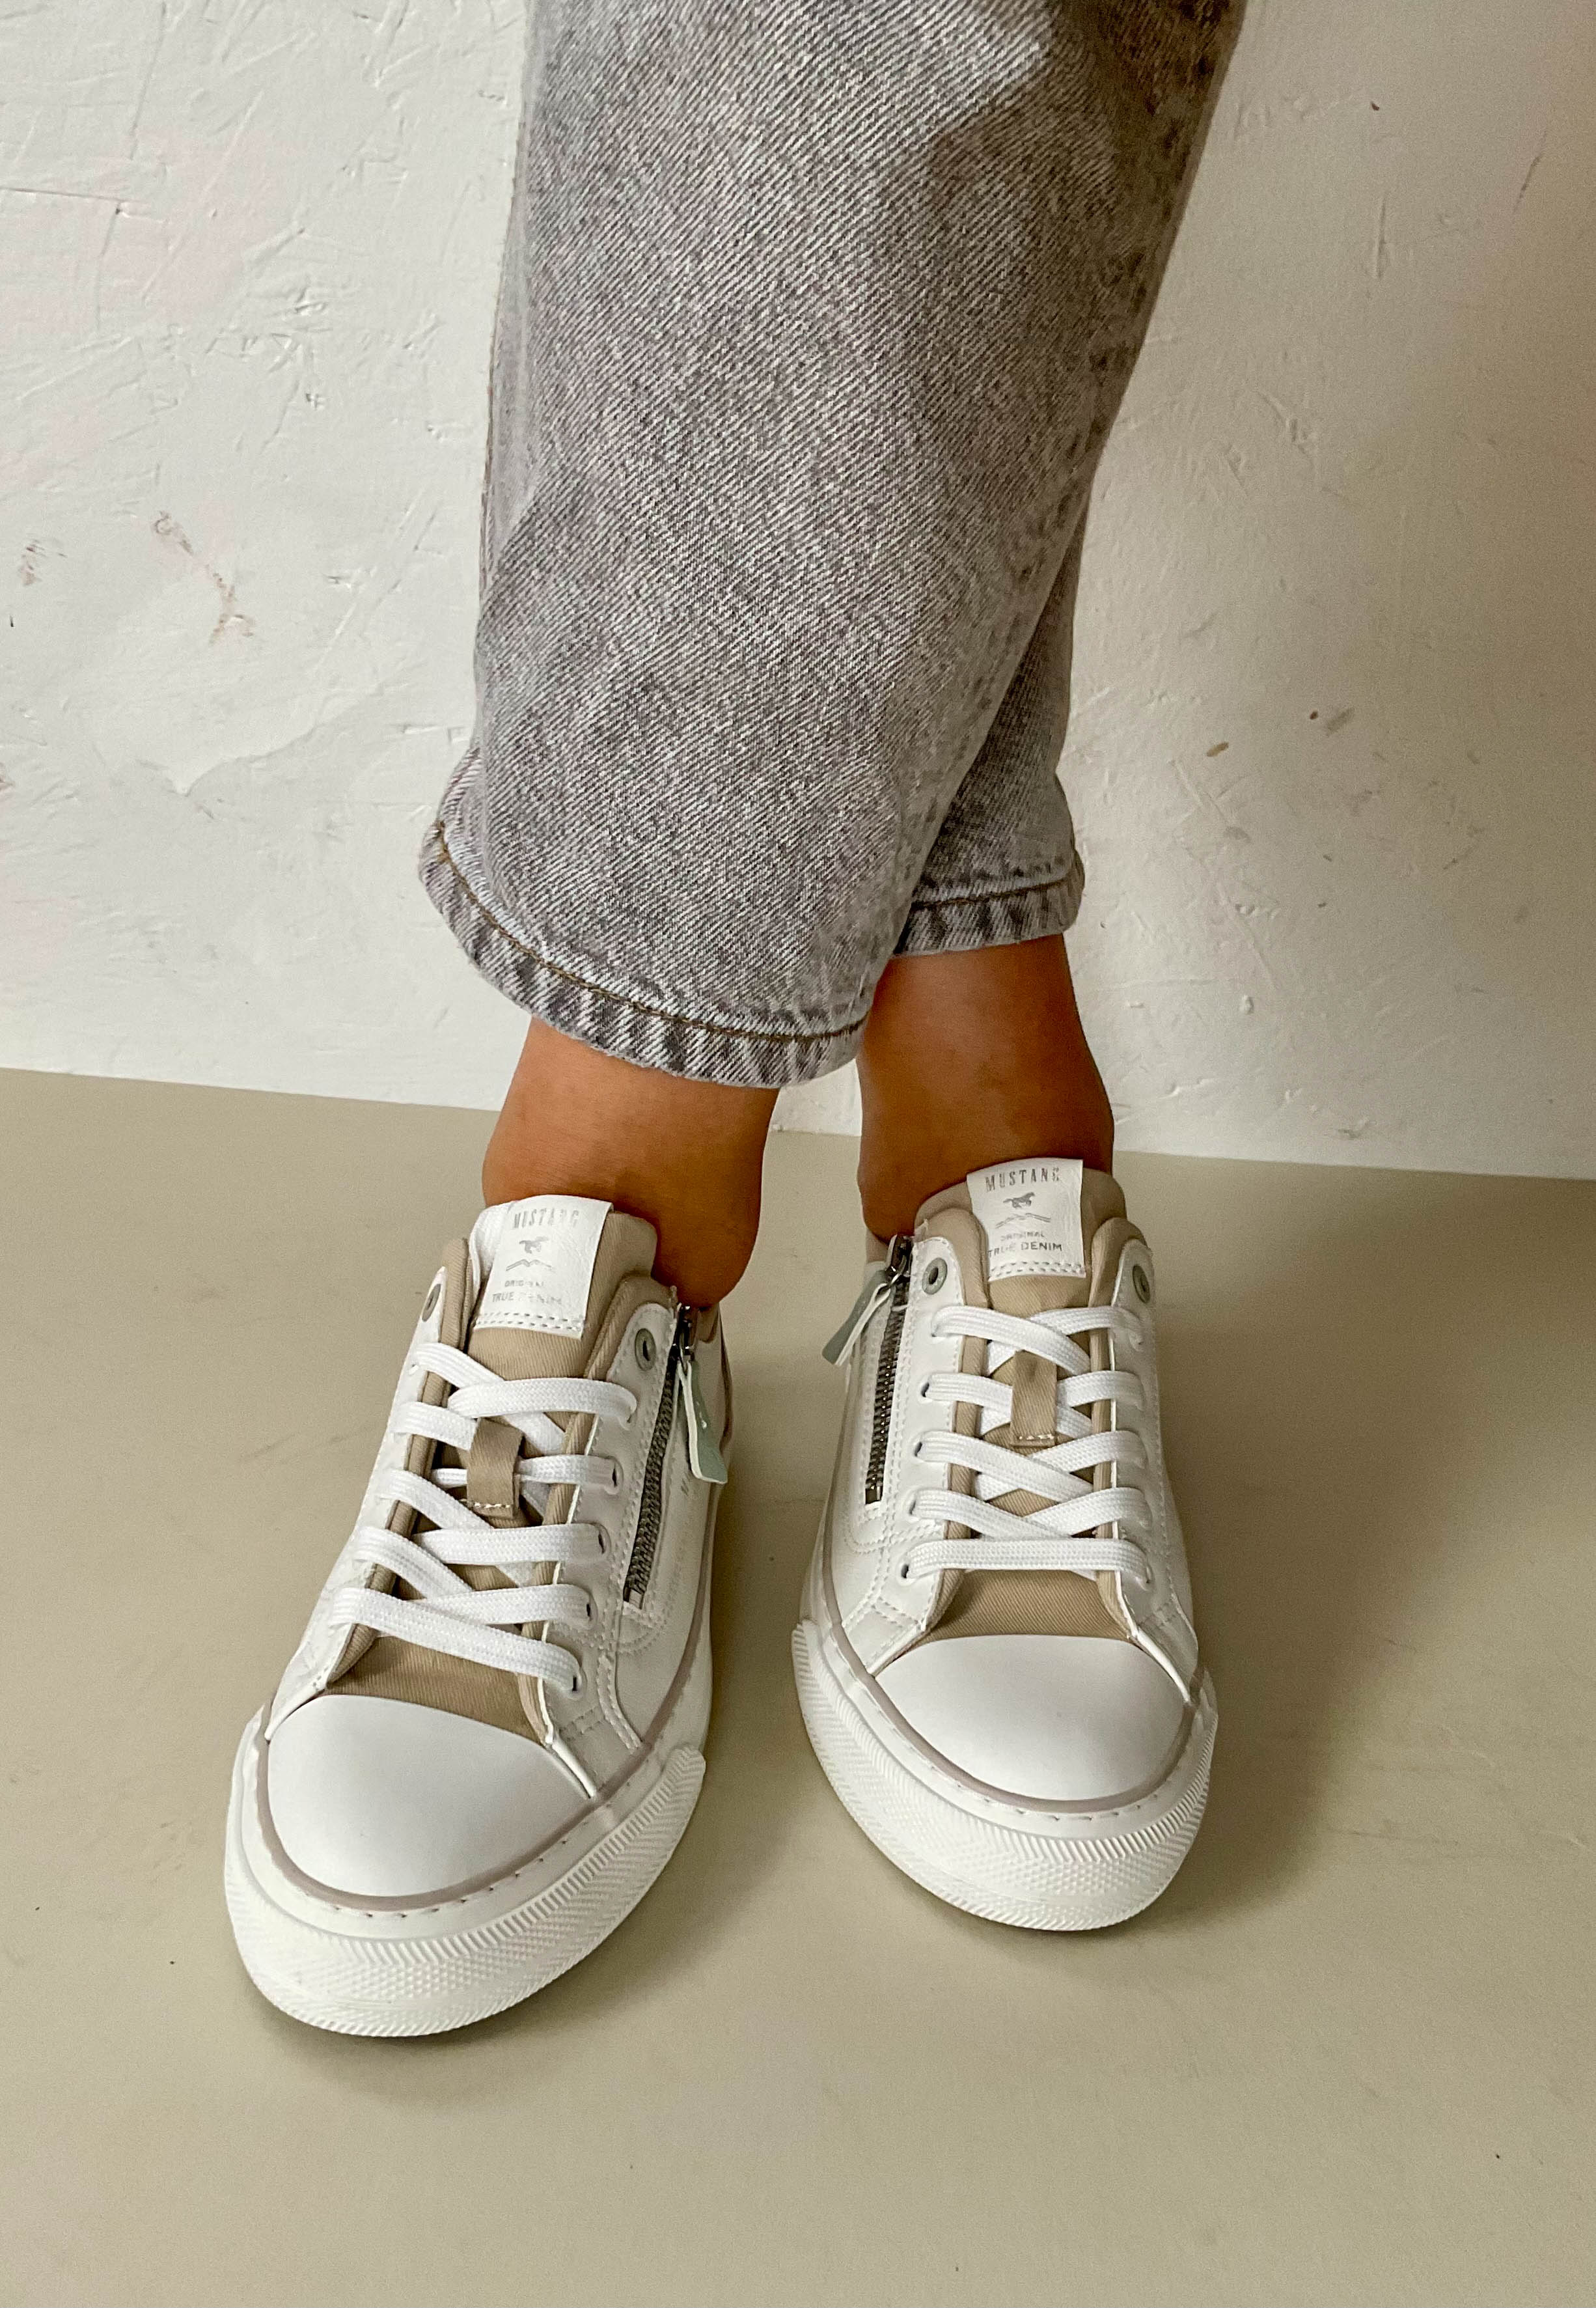 white trainers to wear with jeans